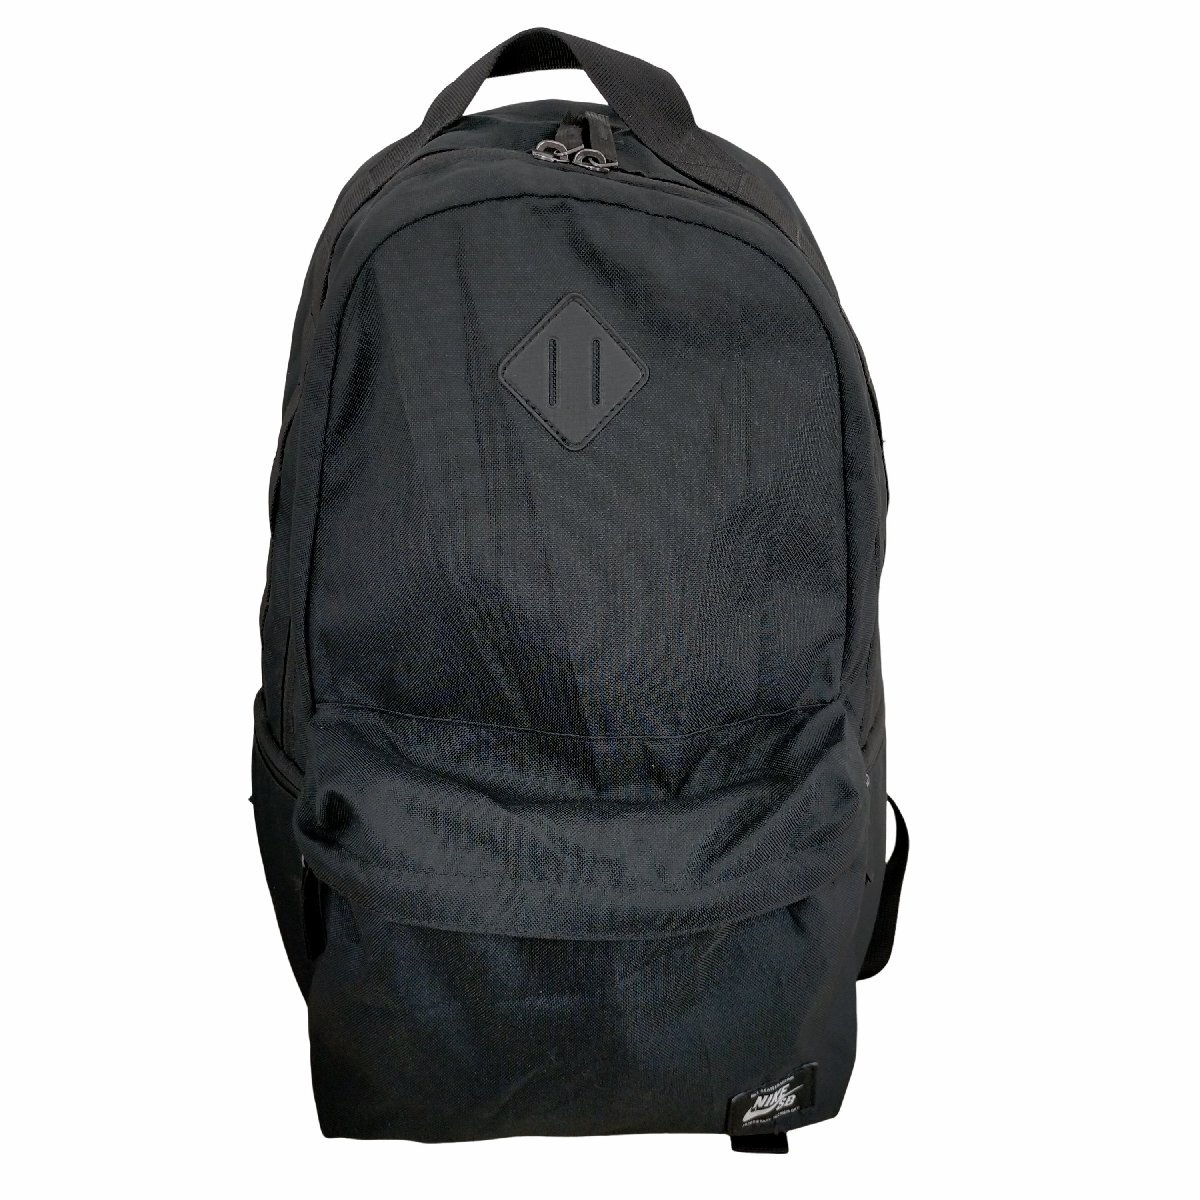 NIKE SB(ナイキスケートボーディング) ICON BACKPACK メンズ ONE SIZE 中古 古着 0249_画像1